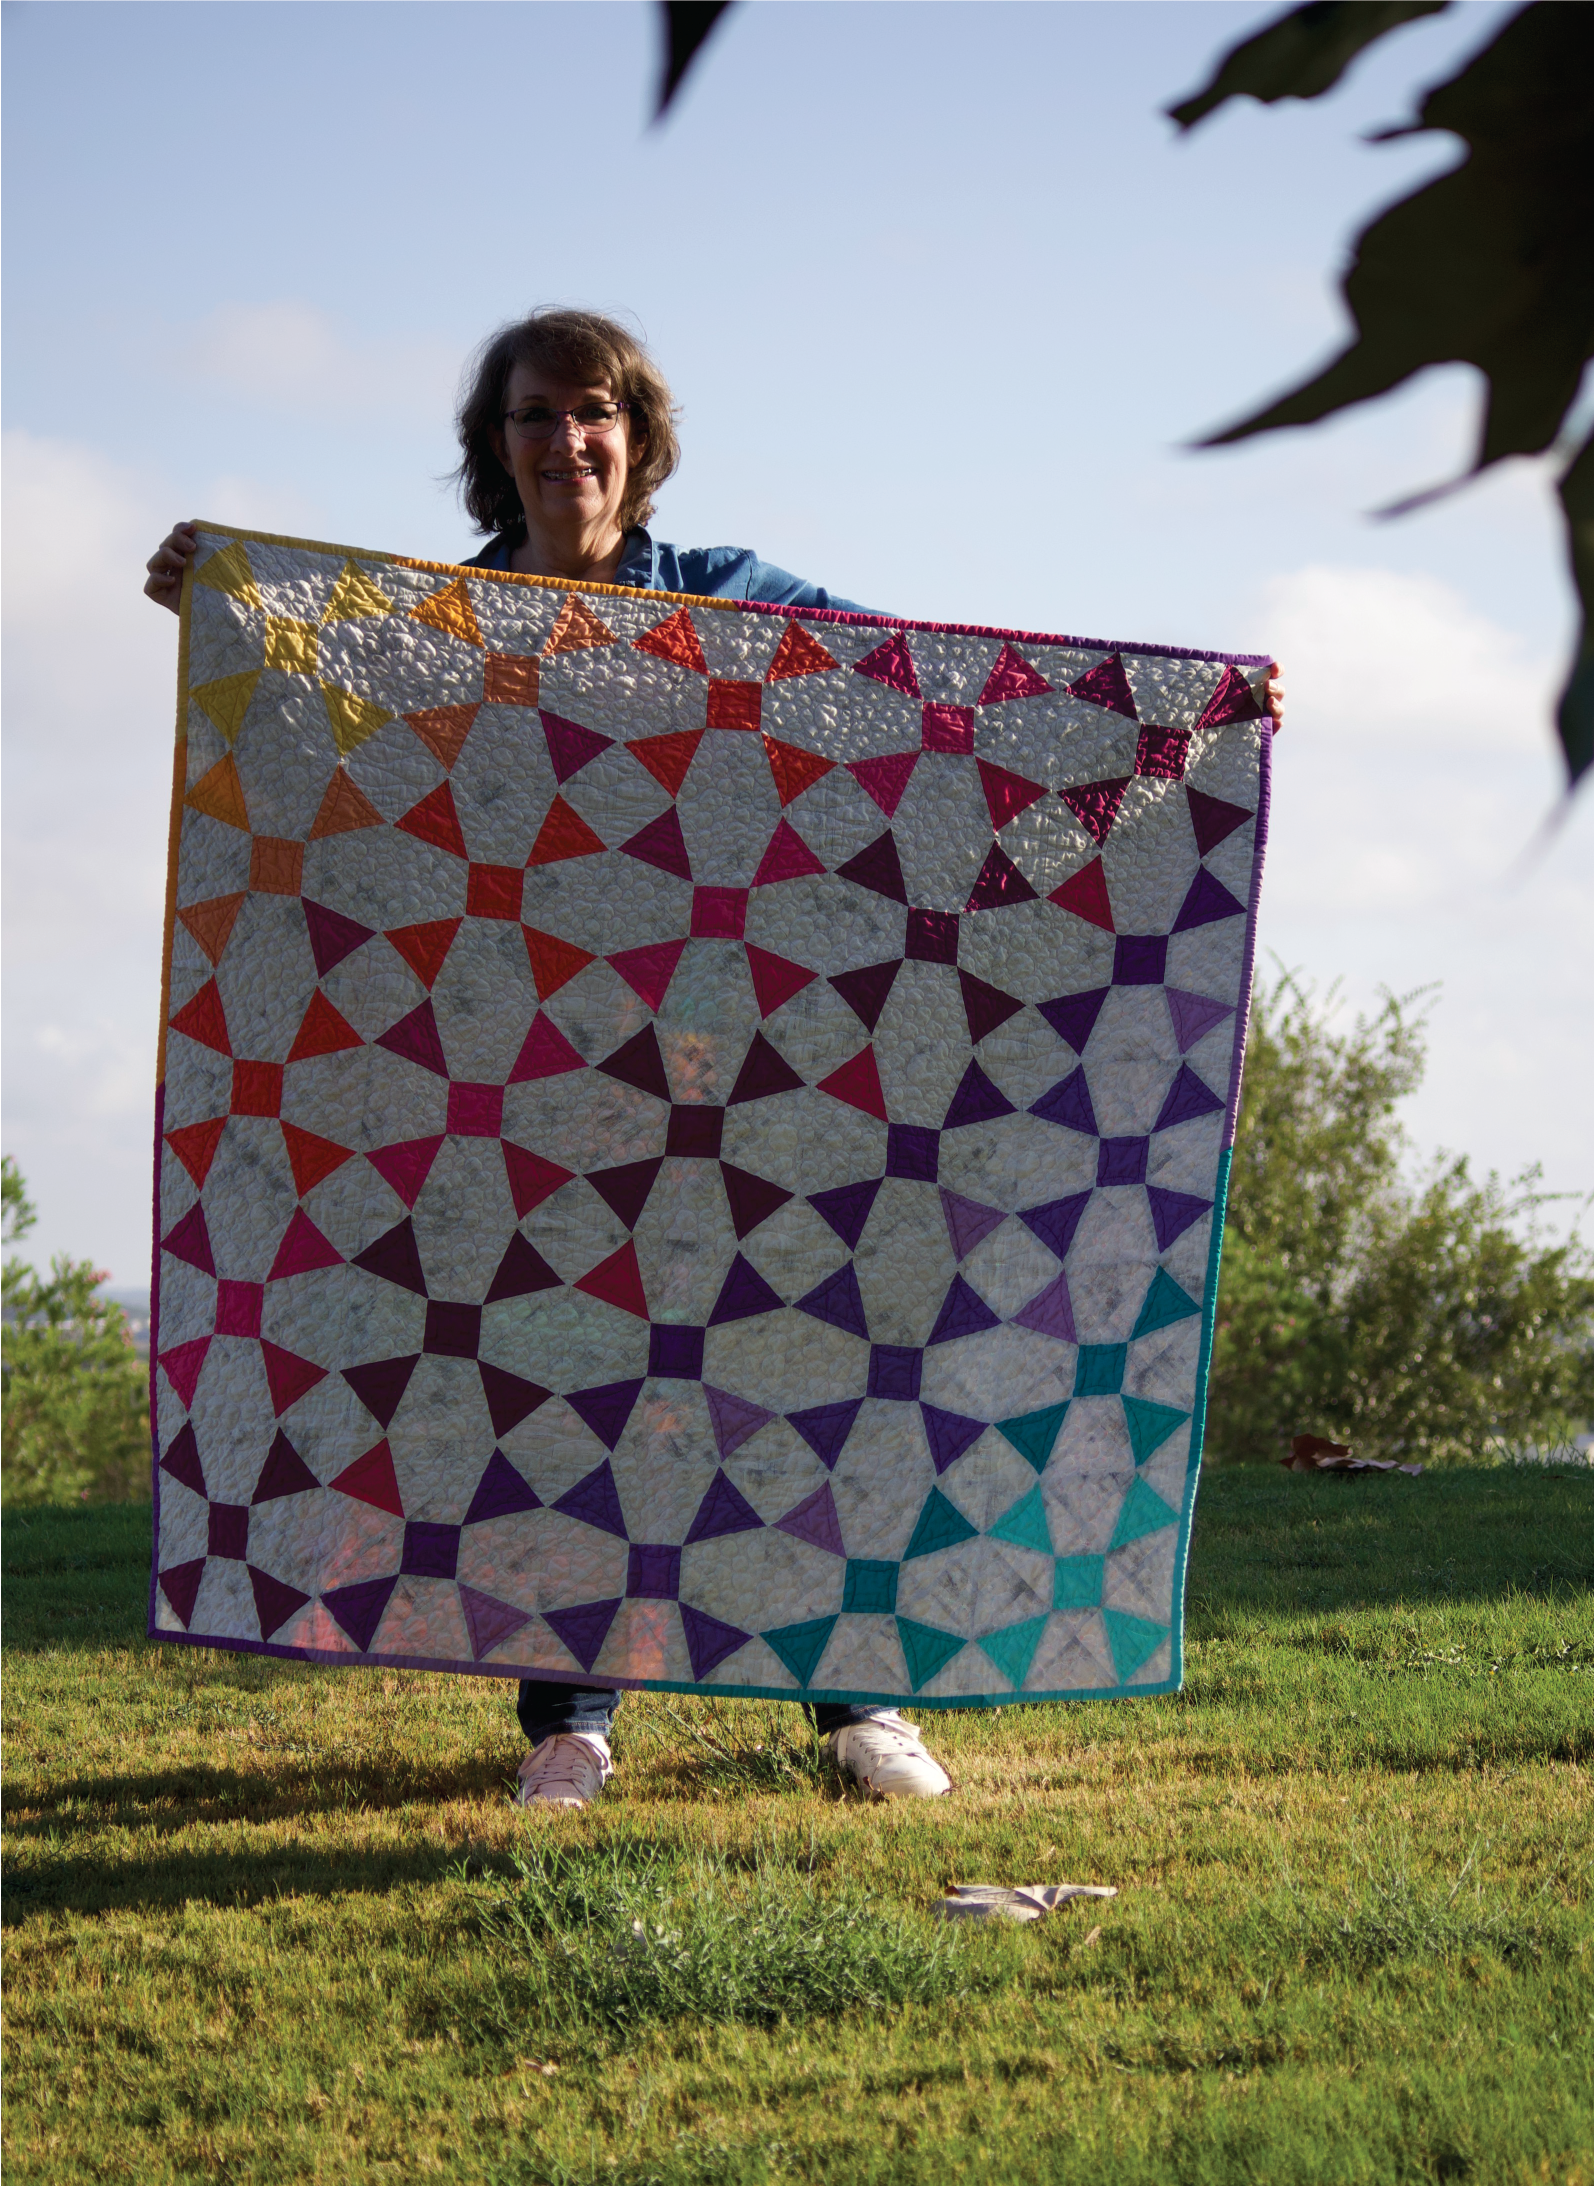 Tranquil Buzz PDF Quilt Pattern